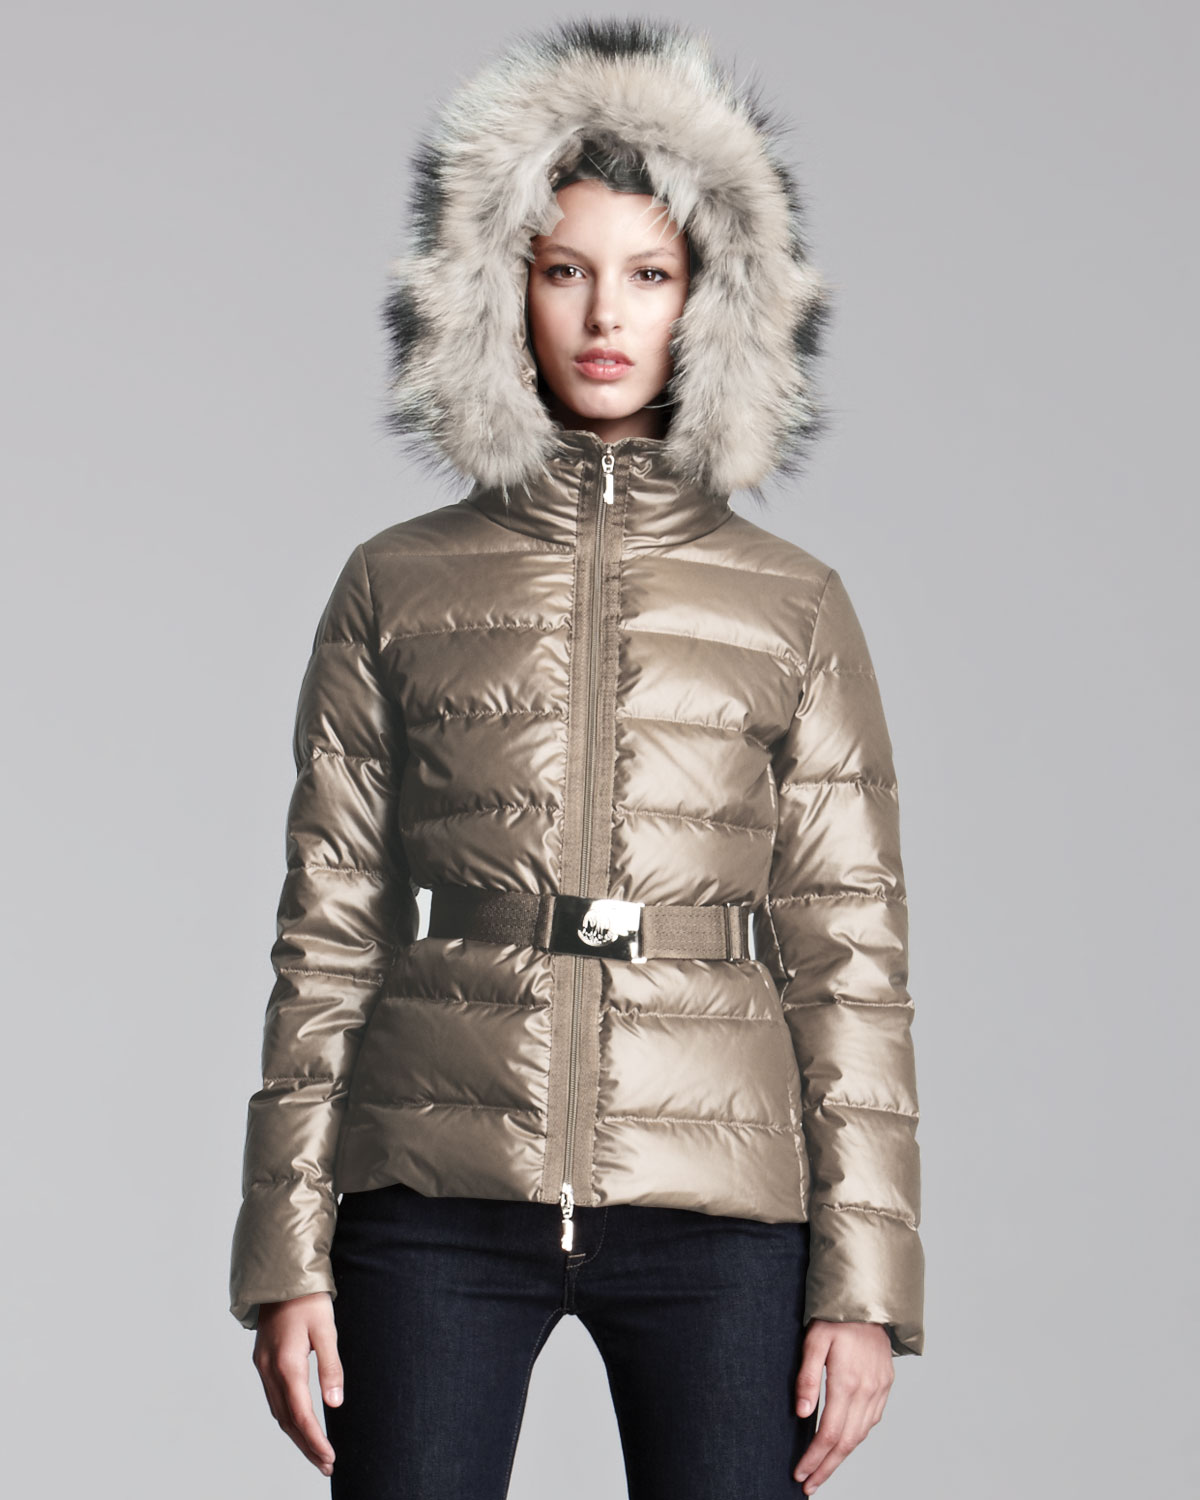 Lyst - Moncler Furhooded Metallic Belted Puffer Jacket in Gray